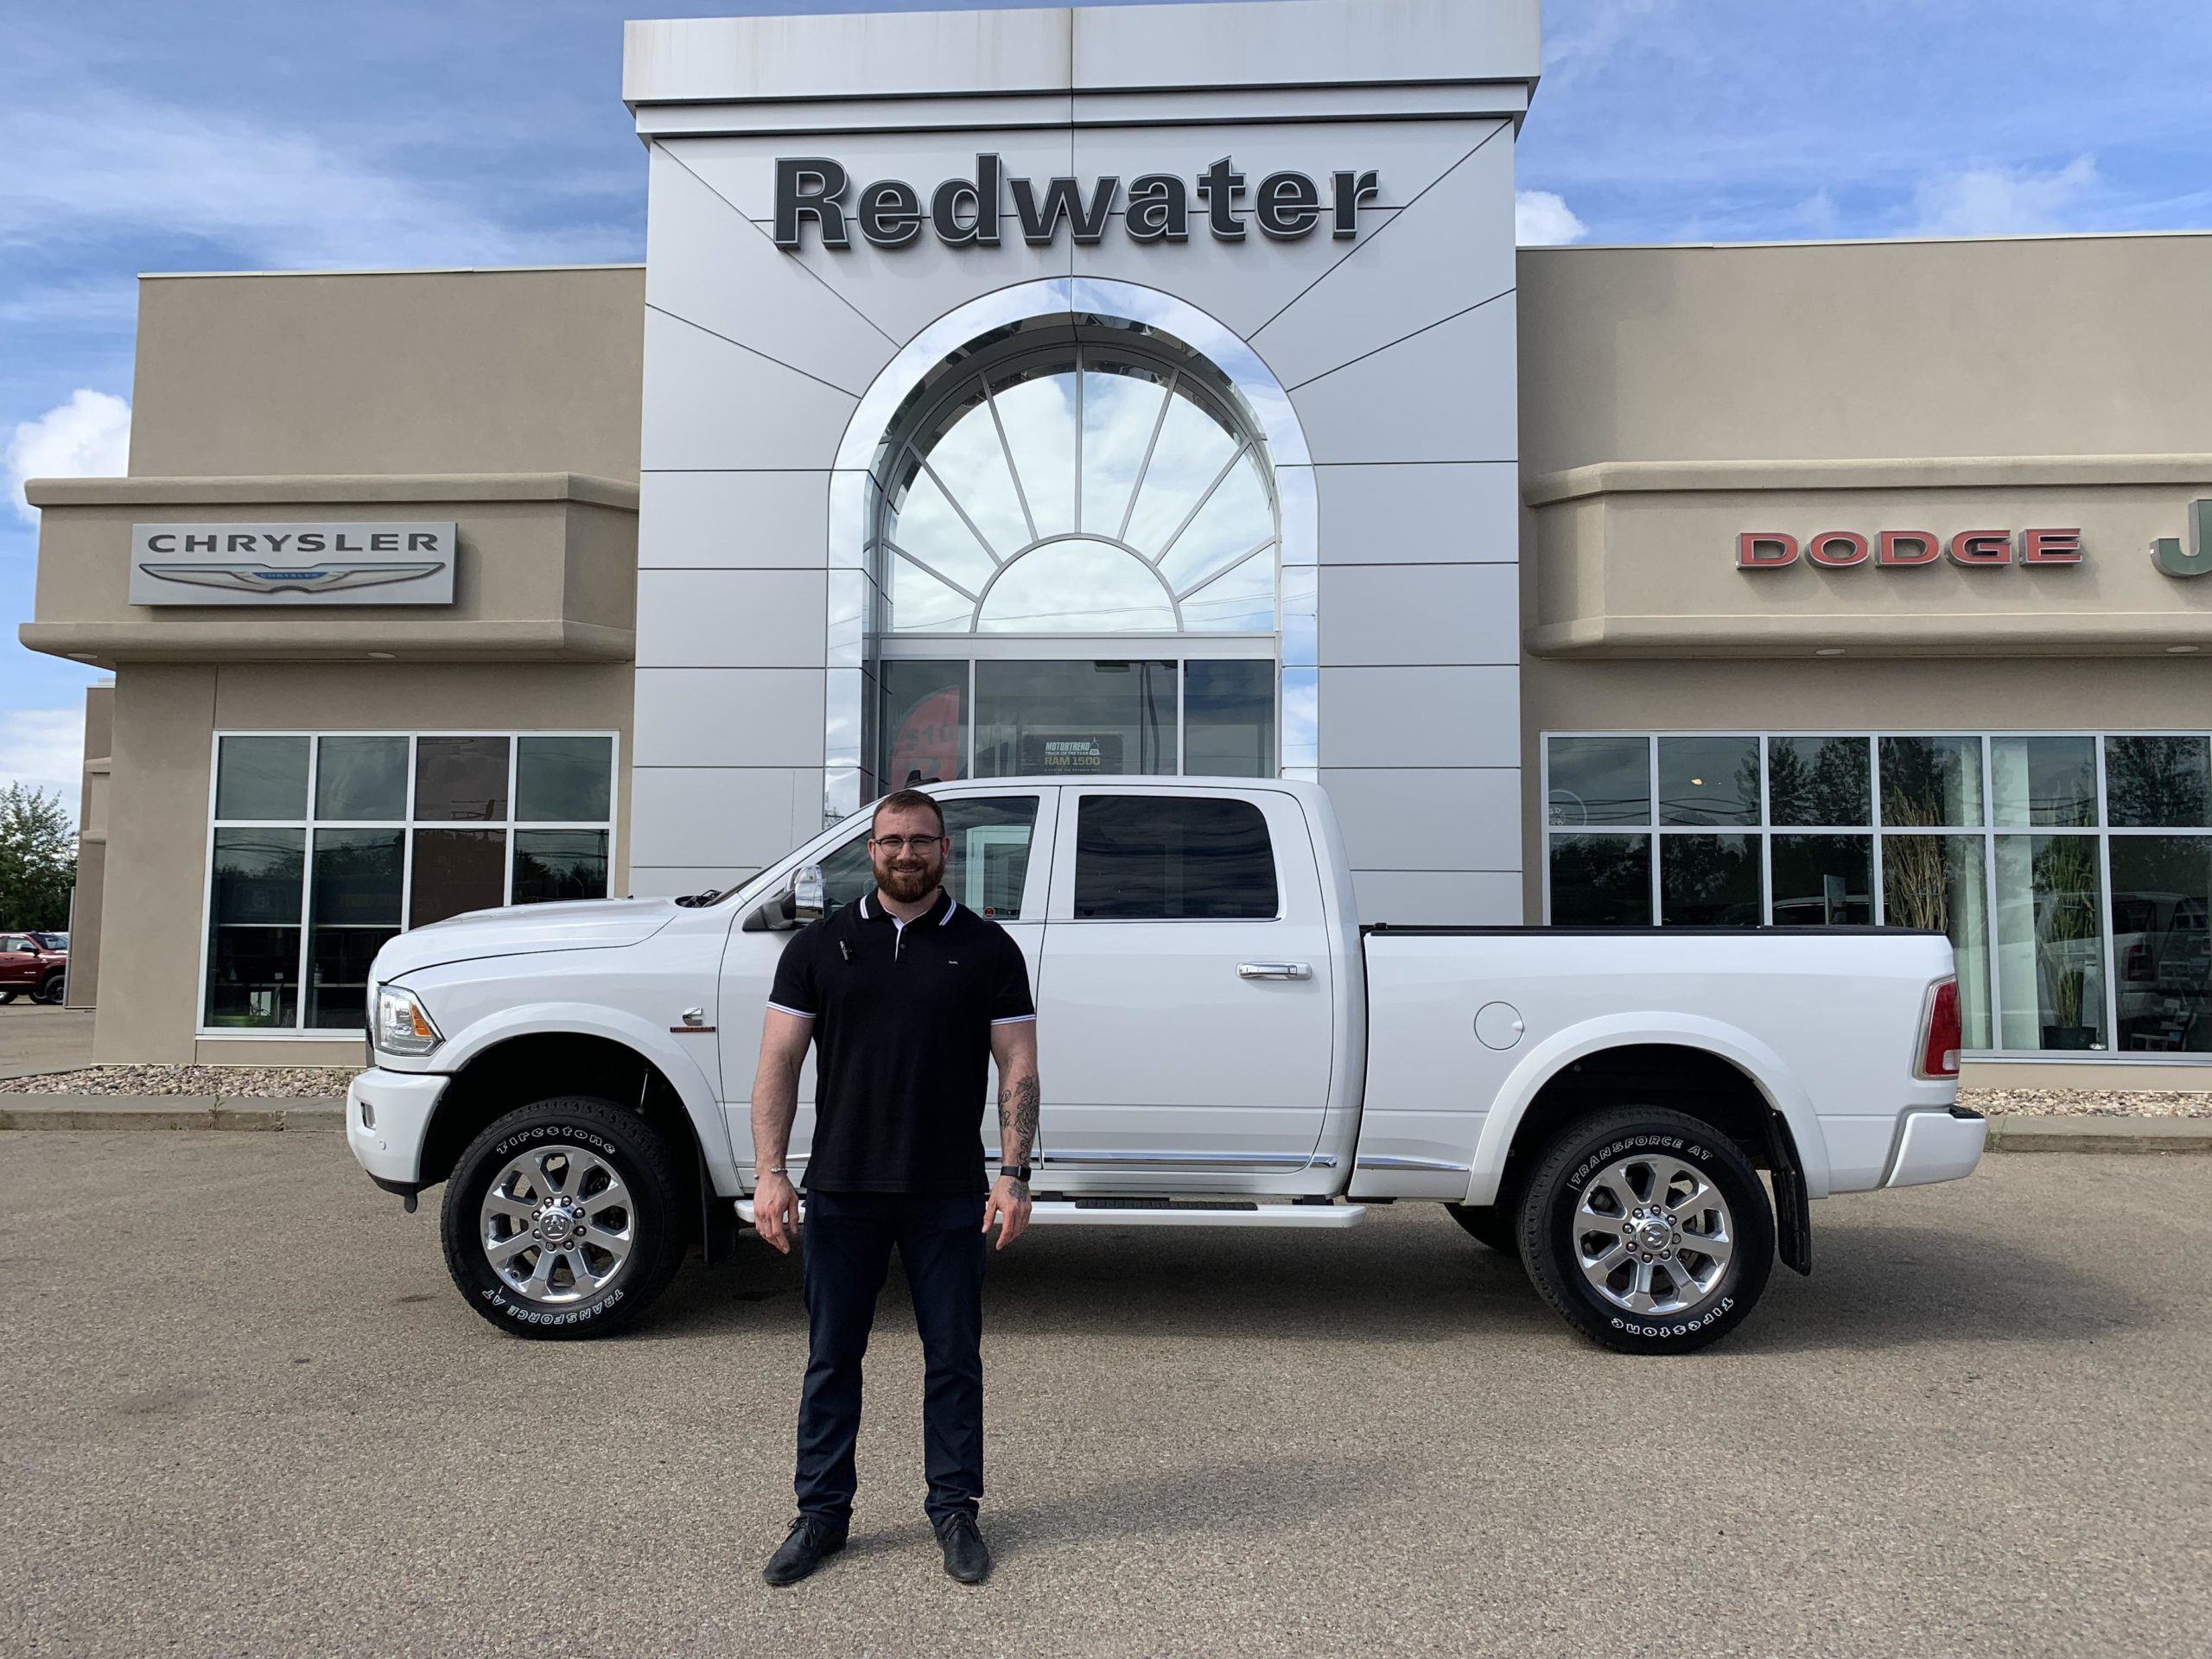 NR34367A 2018 Ram 3500 Limited Crew Cab 4x4 Redwater Dodge